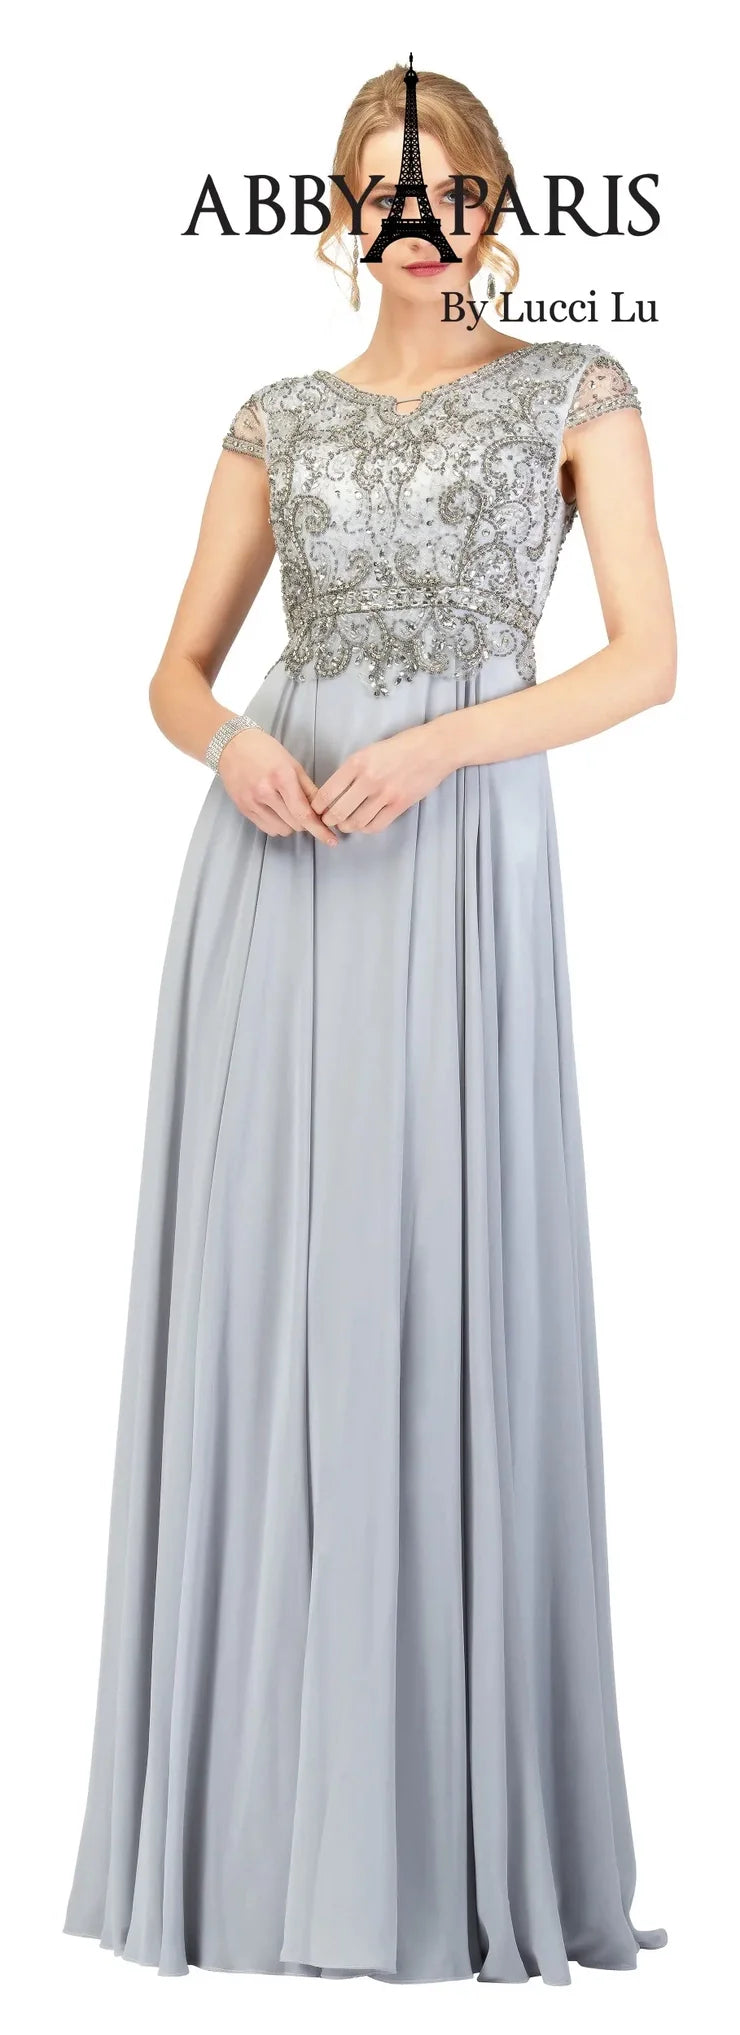 Look sophisticated and elegant at your next formal event with the Abby Paris 95091 A-Line Gown. Crafted from beautiful chiffon fabric, this knee-length dress features an embellished bodice and short sleeves for a polished look. Enjoy superior comfort and a flattering fit at your MOB or formal event.